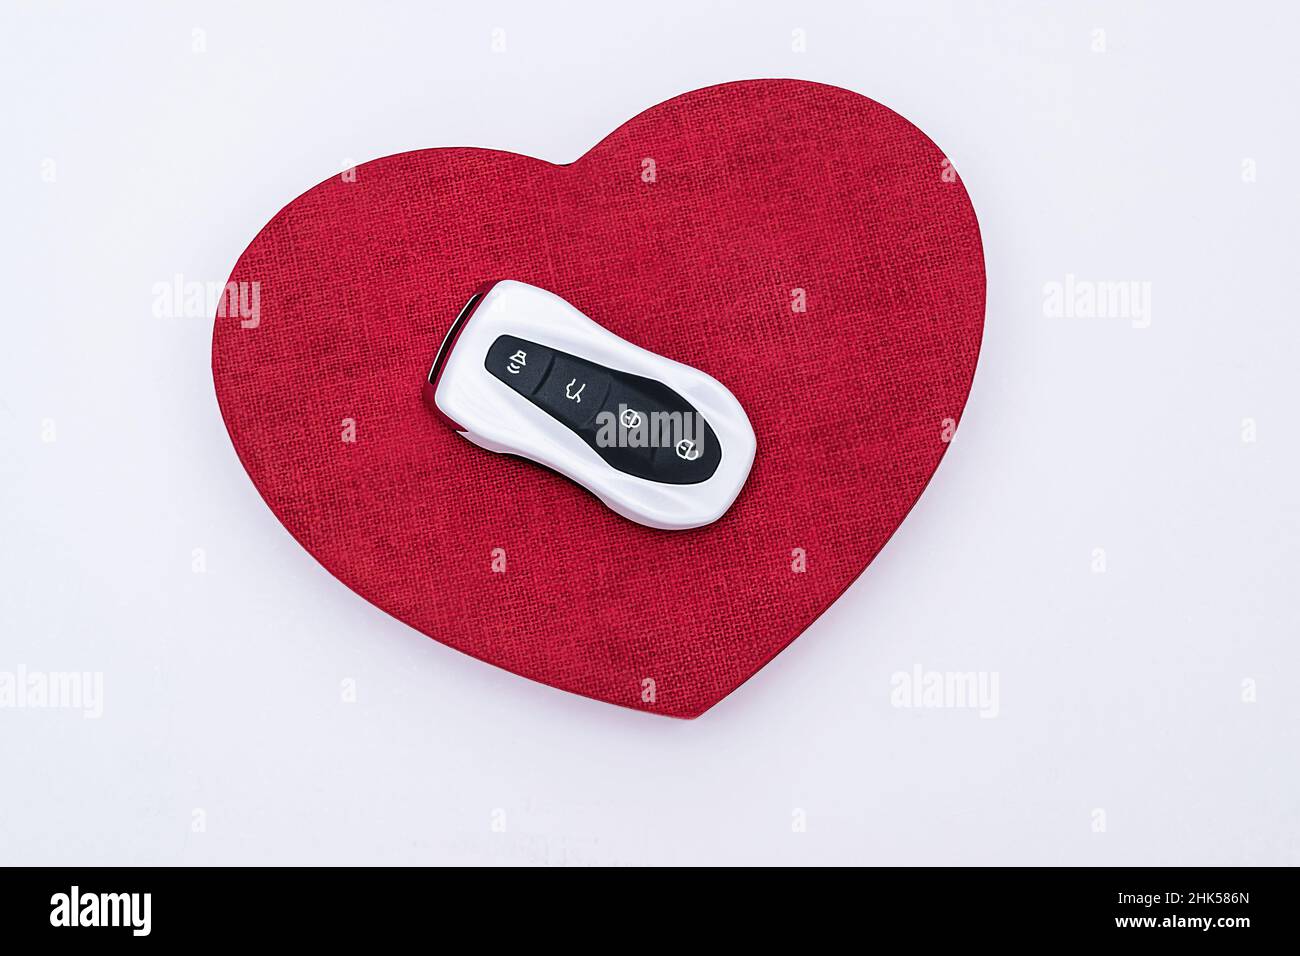 Flat lay concept and gift idea. Smart car key on a red embossed heart in the middle of a white background. Electronics, spare parts and car accessorie Stock Photo